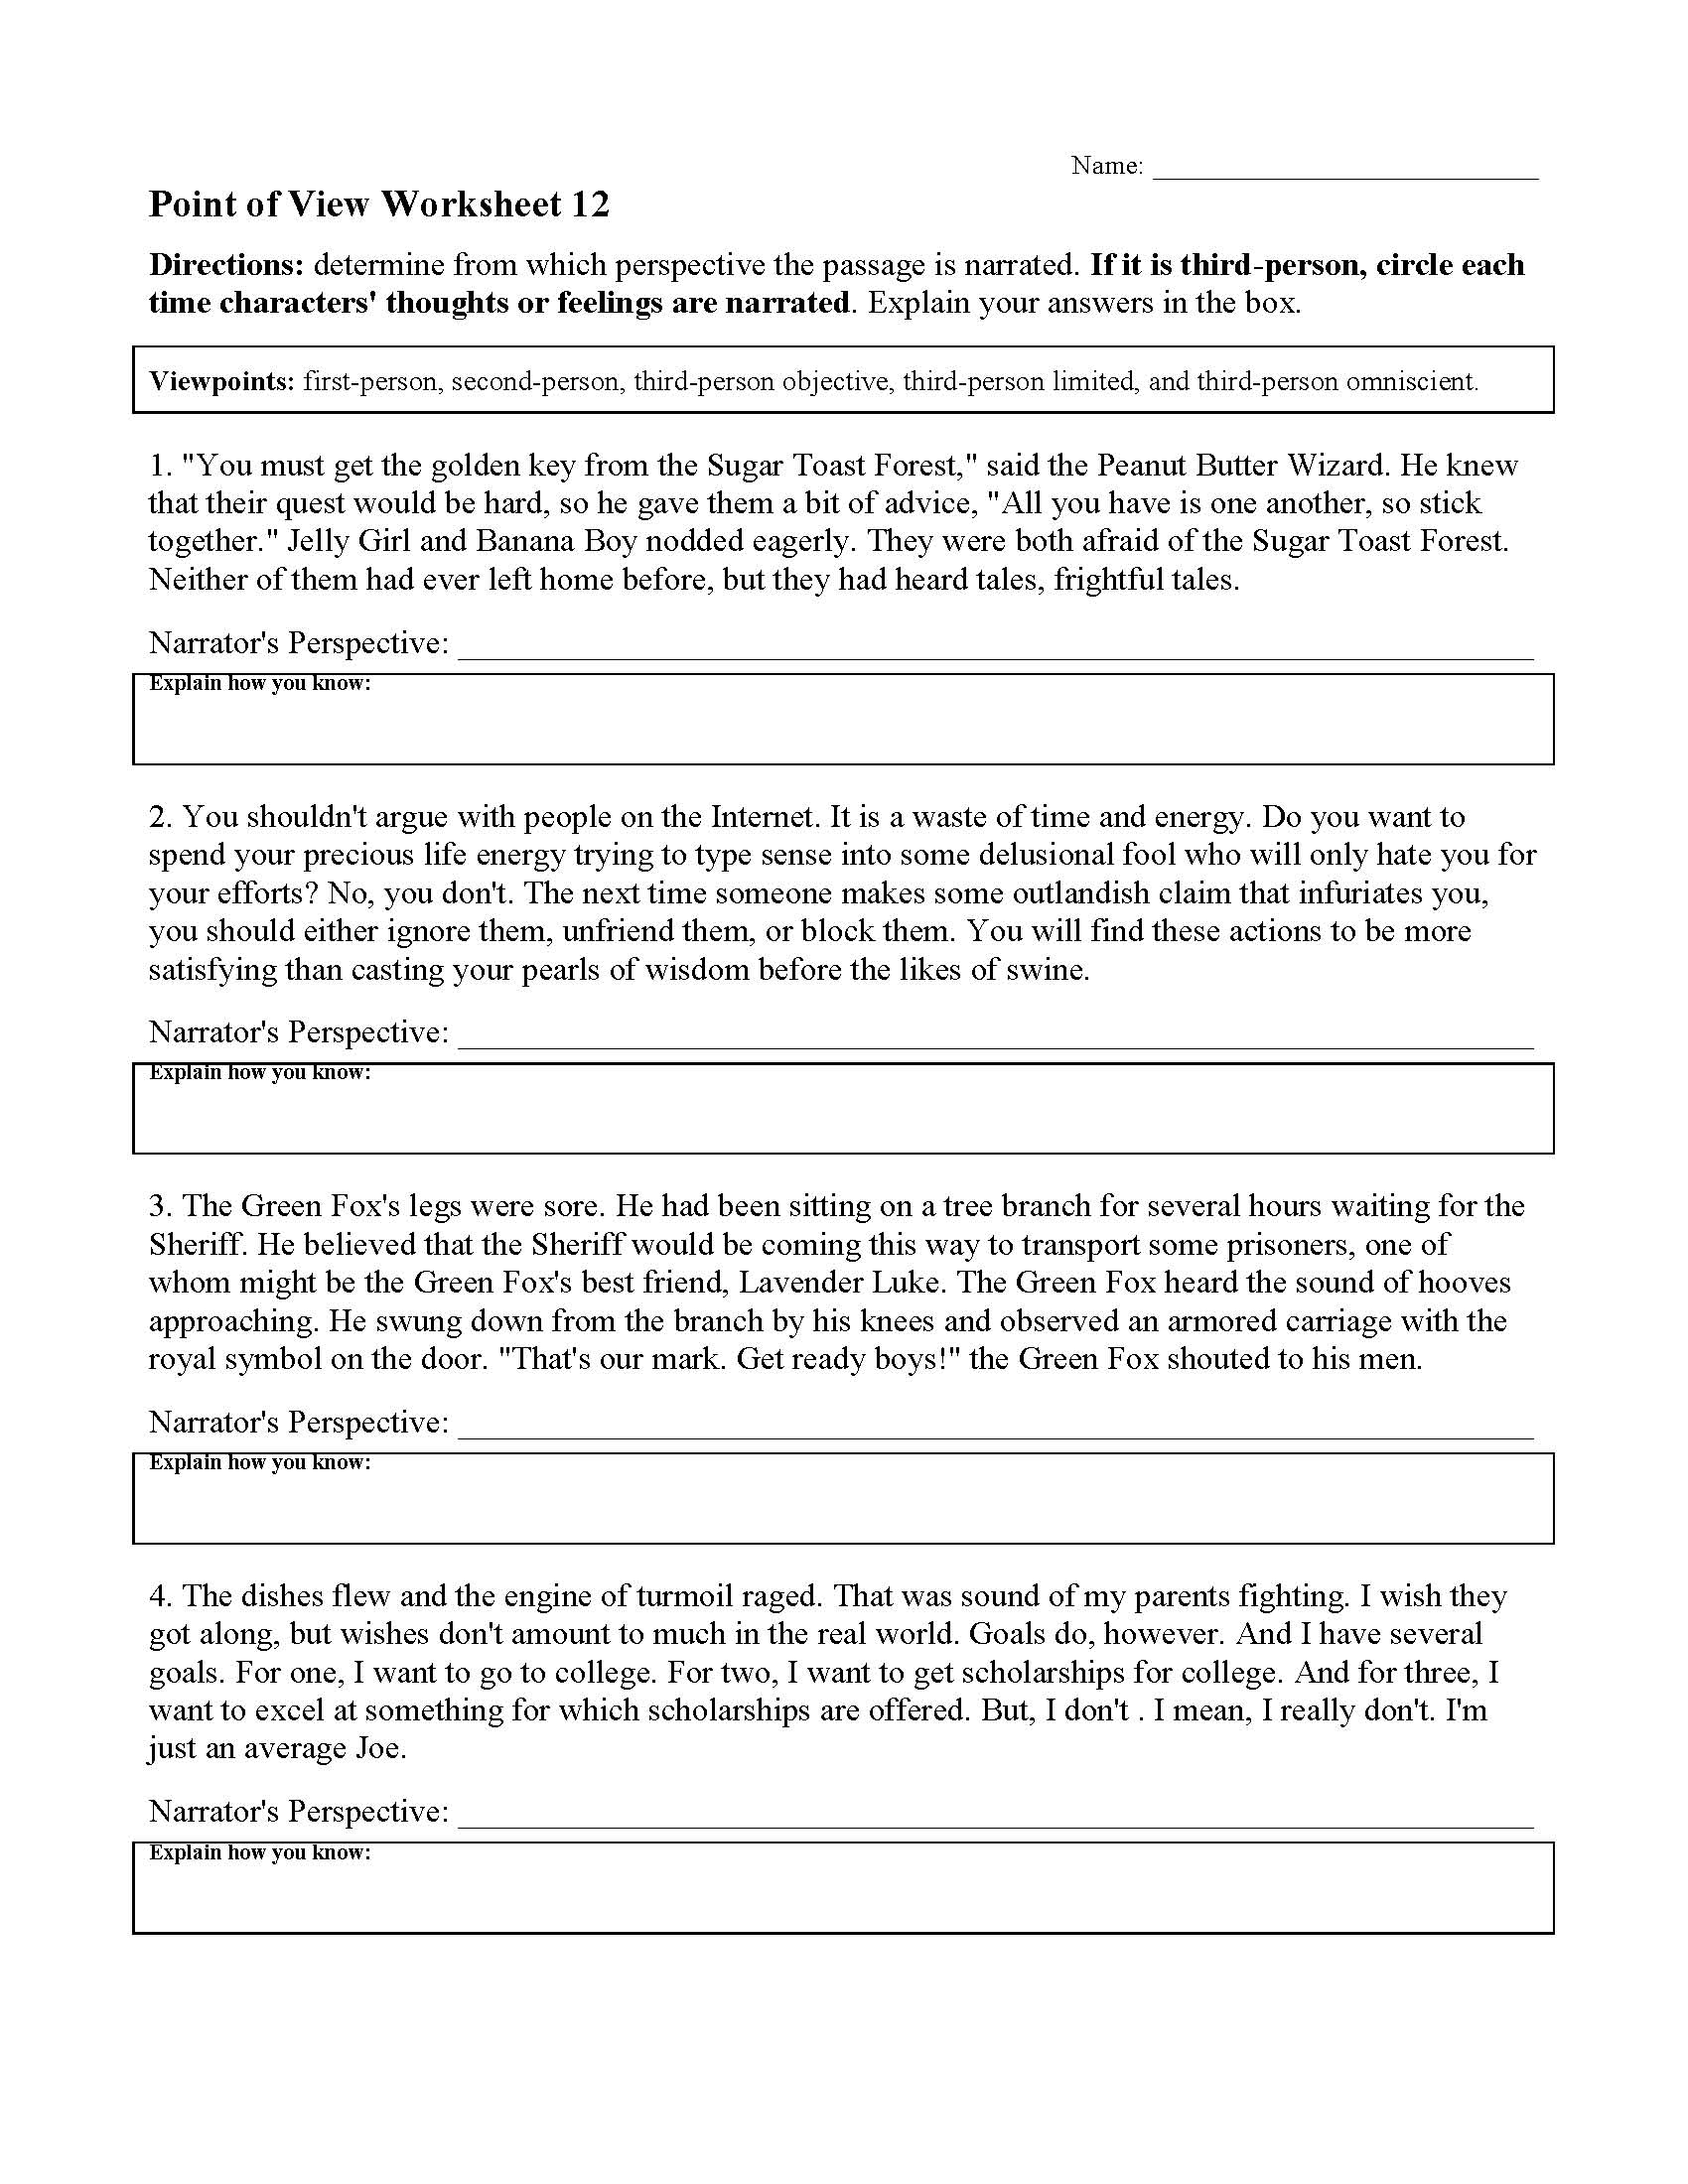 This is a preview image of Point of View Worksheet 12. Click on it to enlarge it or view the source file.